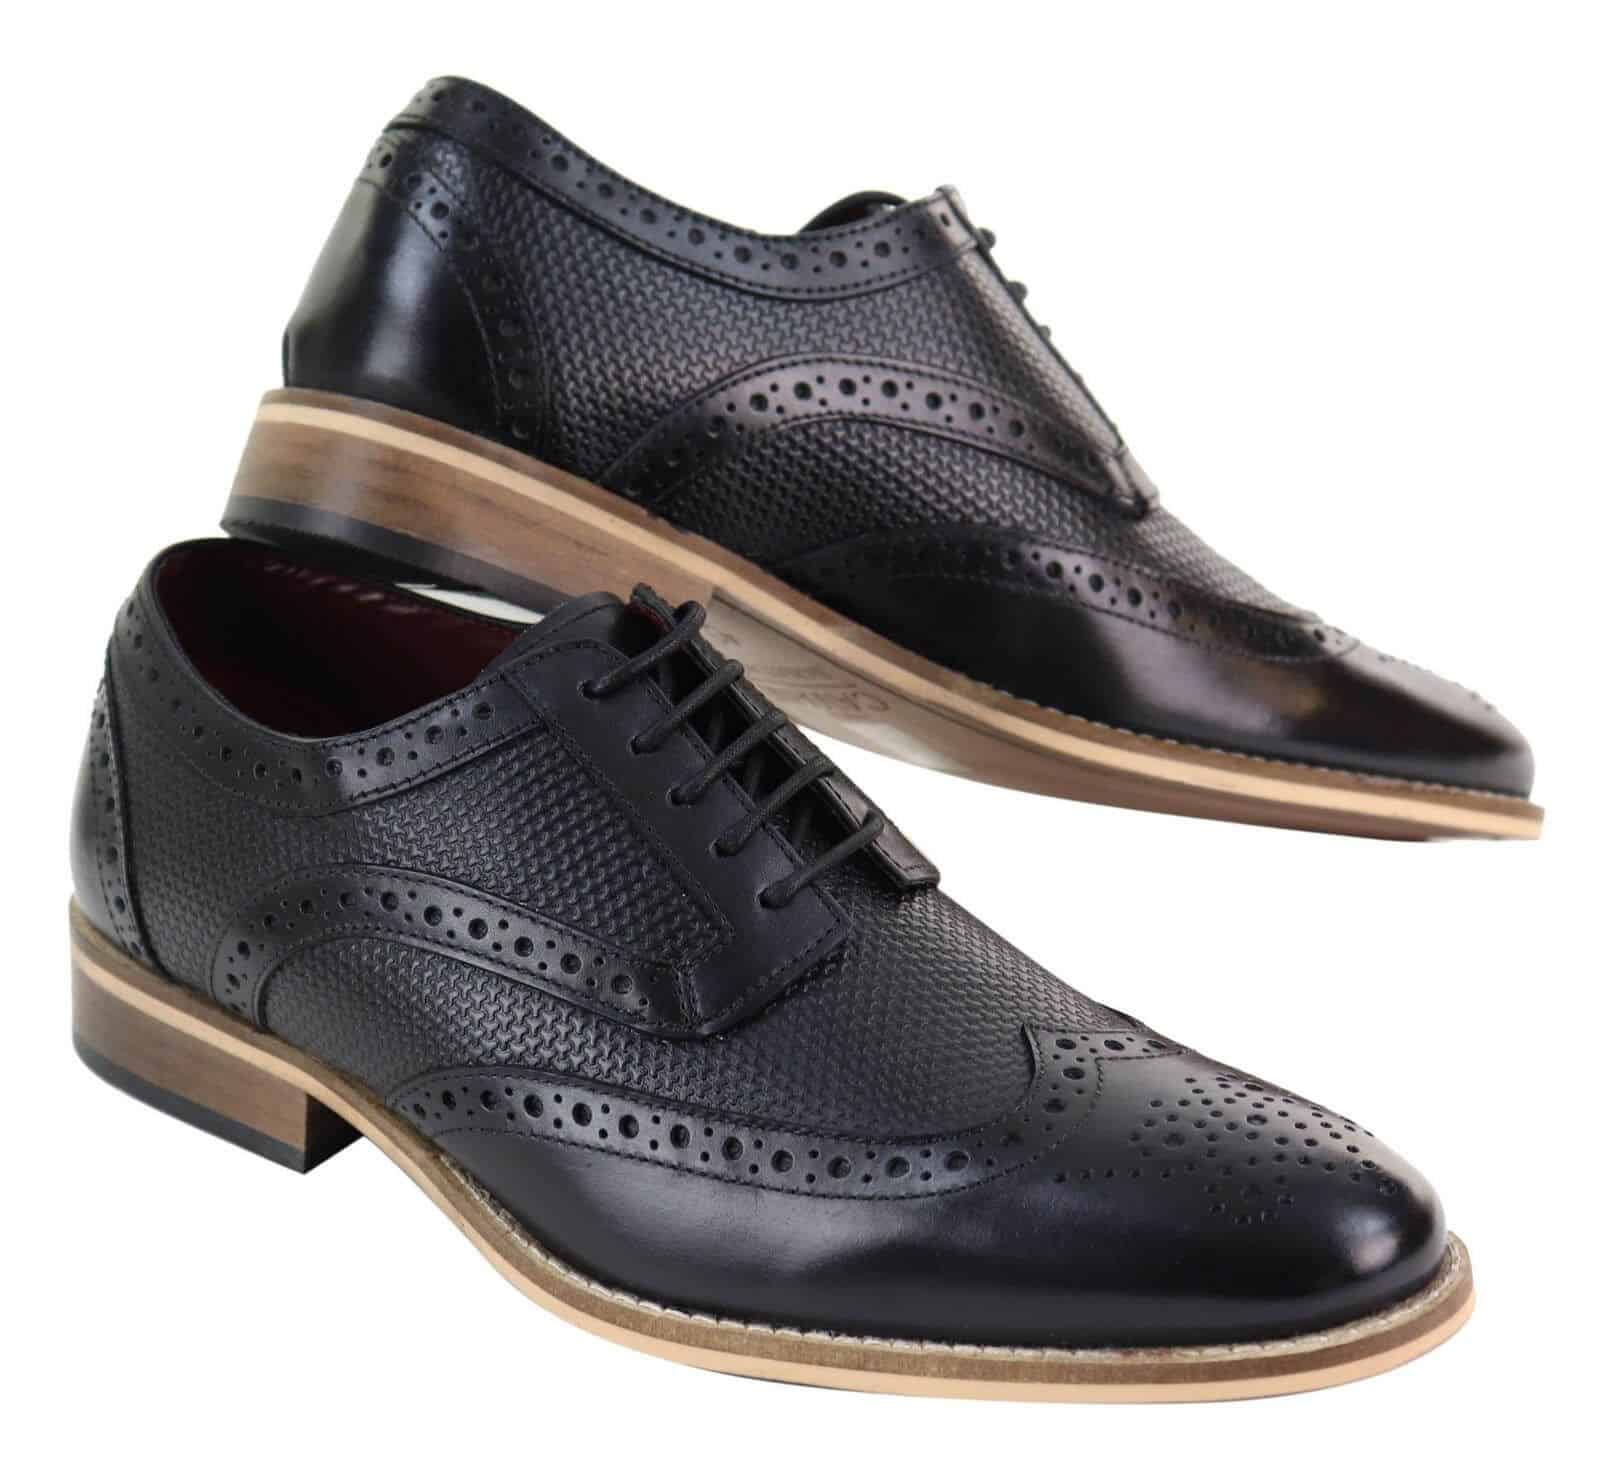 Mens Oxford Shoes with Modern Pattern | Happy Gentleman